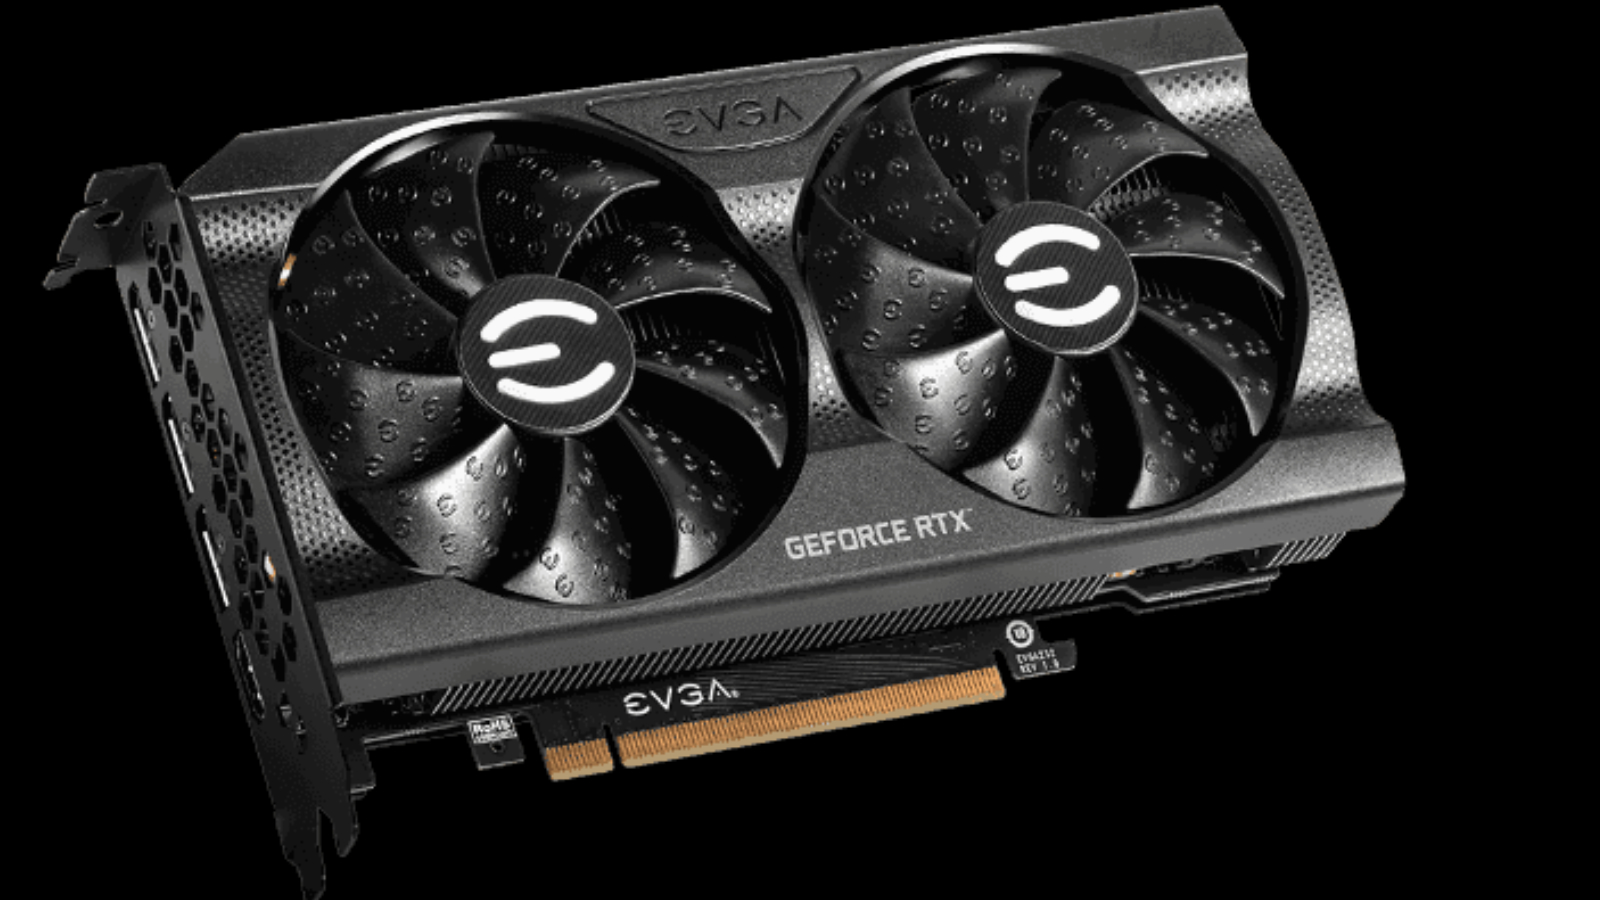 NVIDIA GeForce RTX 3060 Ti Debuts With Exceptional Performance Per